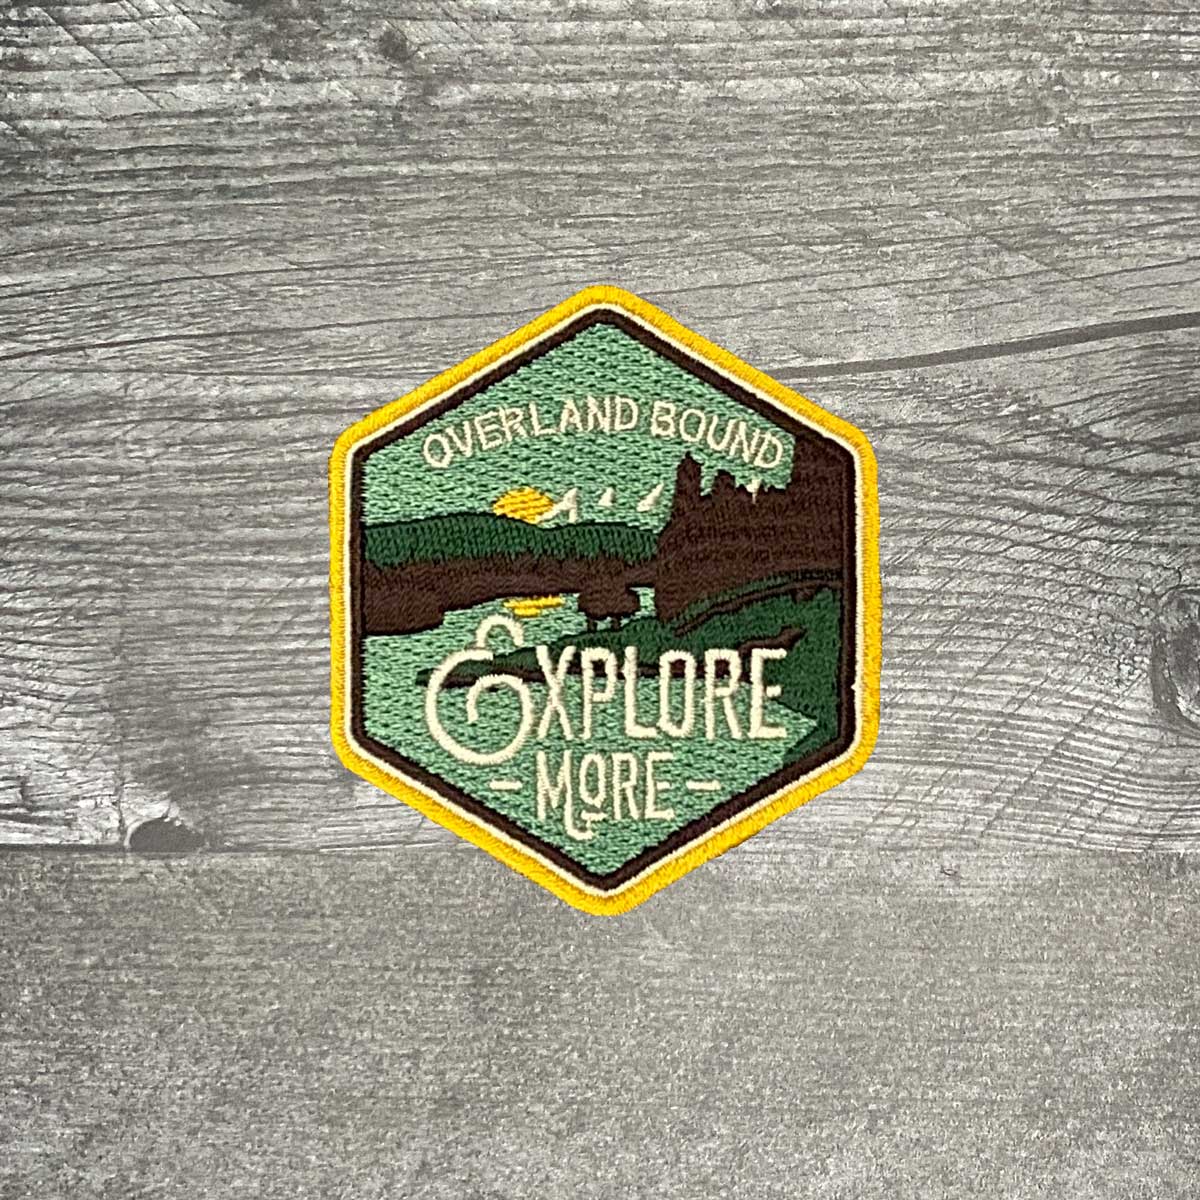 Explore More Patch - Overland Bound